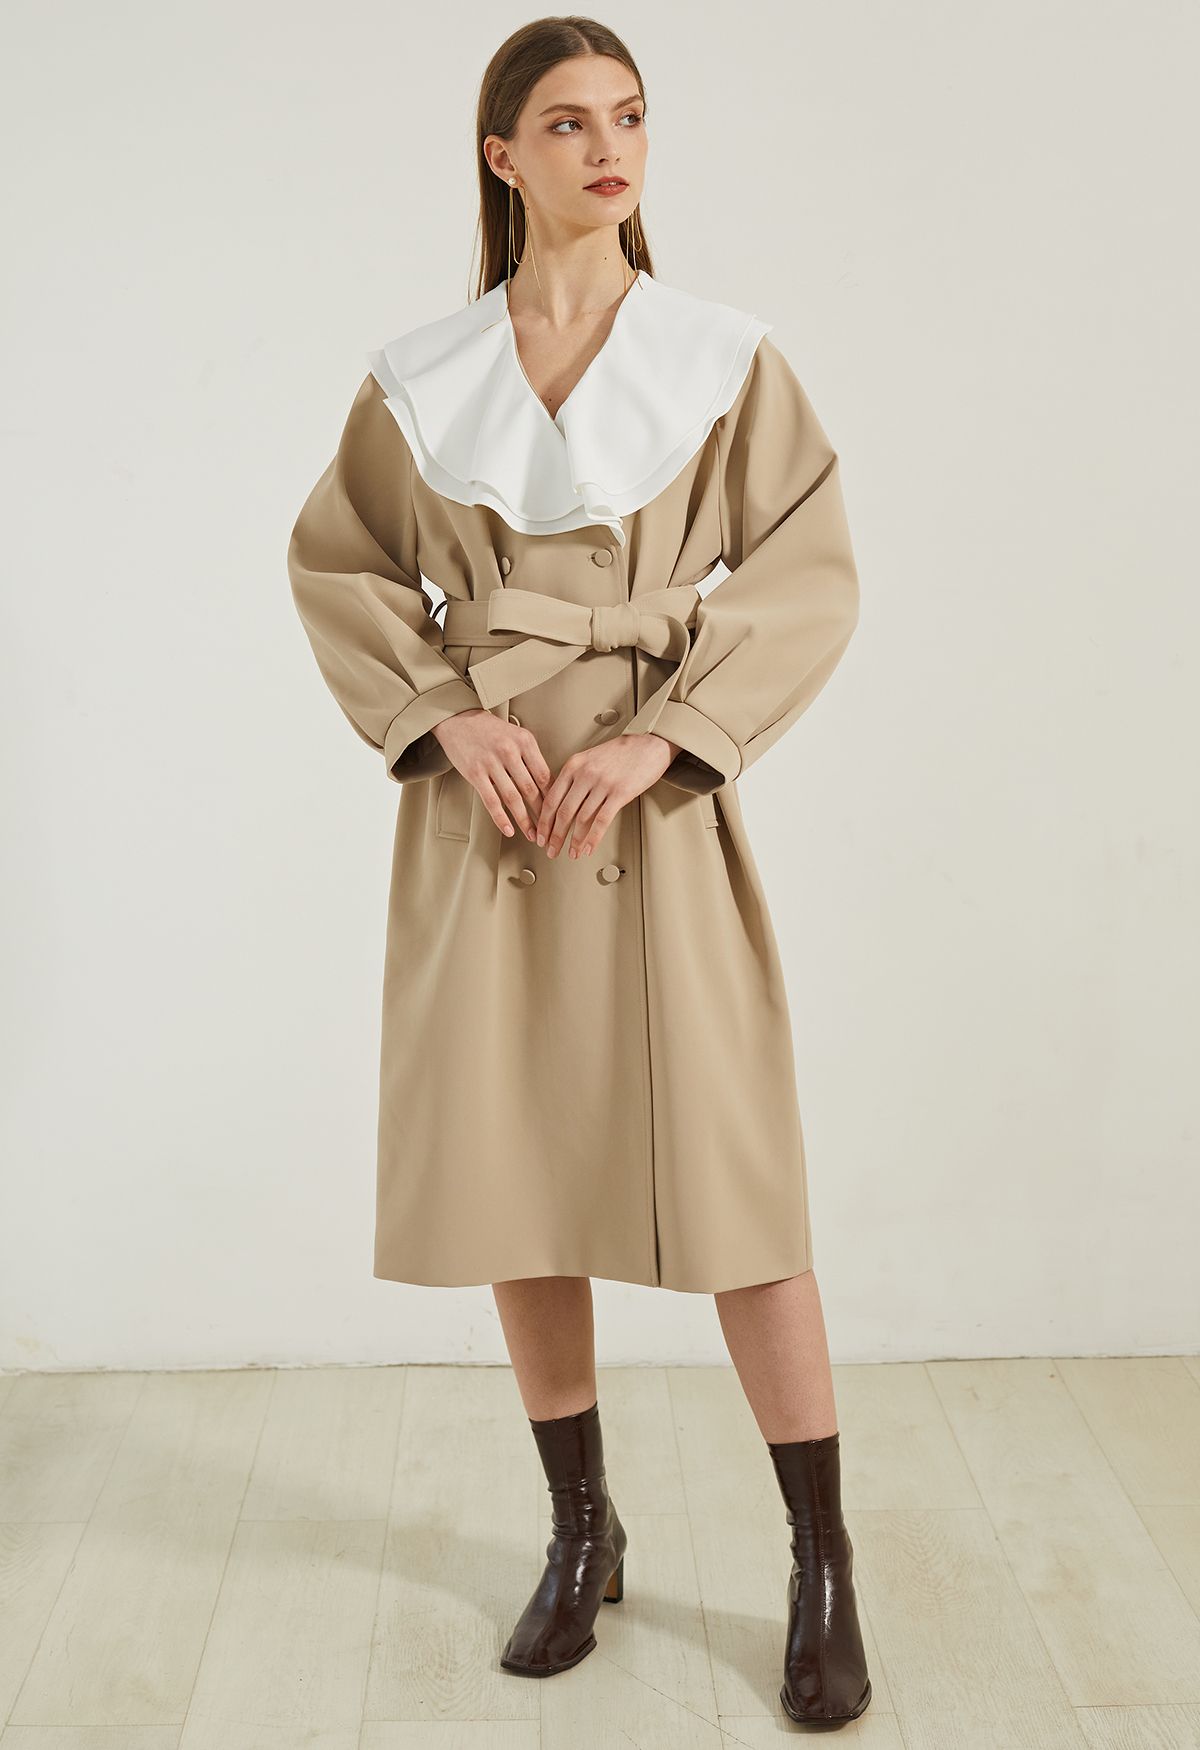 Ruffle Neck Double-Breasted Trench Dress in Light Tan